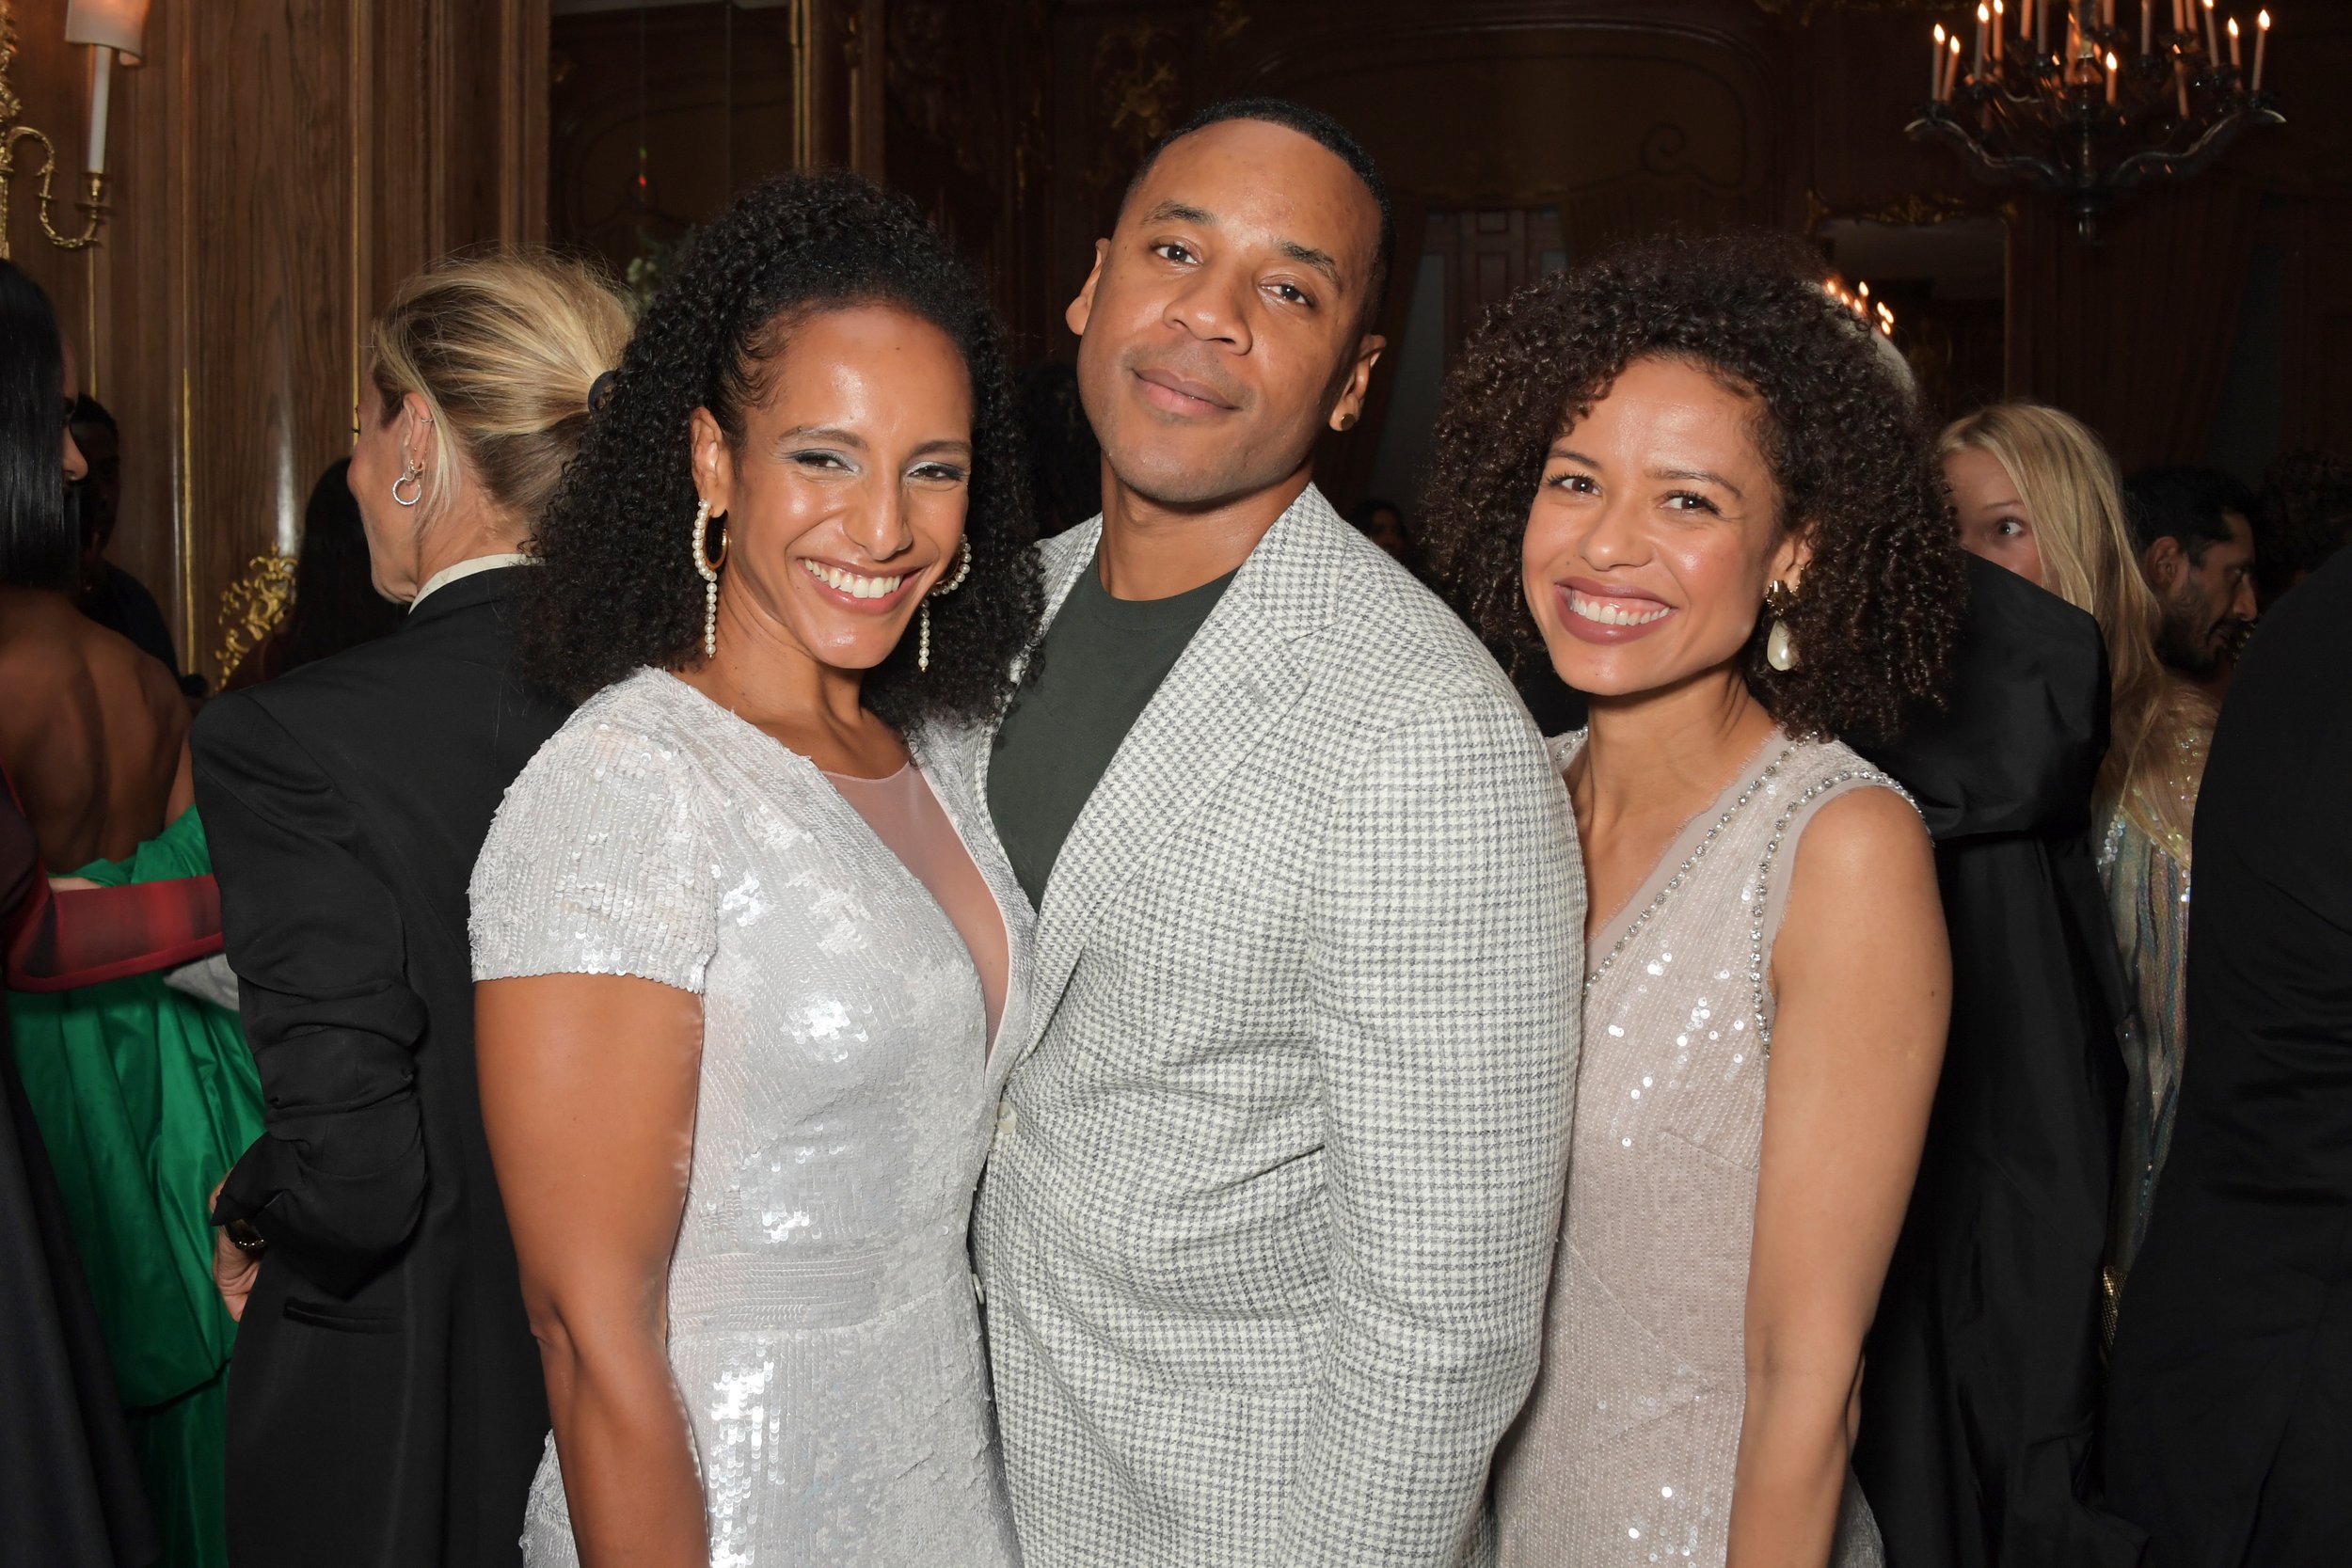  LONDON, ENGLAND - SEPTEMBER 04: (L to R) Afua Hirsch, Reggie Yates and Gugu Mbatha-Raw attend a celebration of Edward Enninful's new memoir "A Visible Man" at Claridge's Hotel on September 4, 2022 in London, England. (Photo by David M. Benett/Dave B